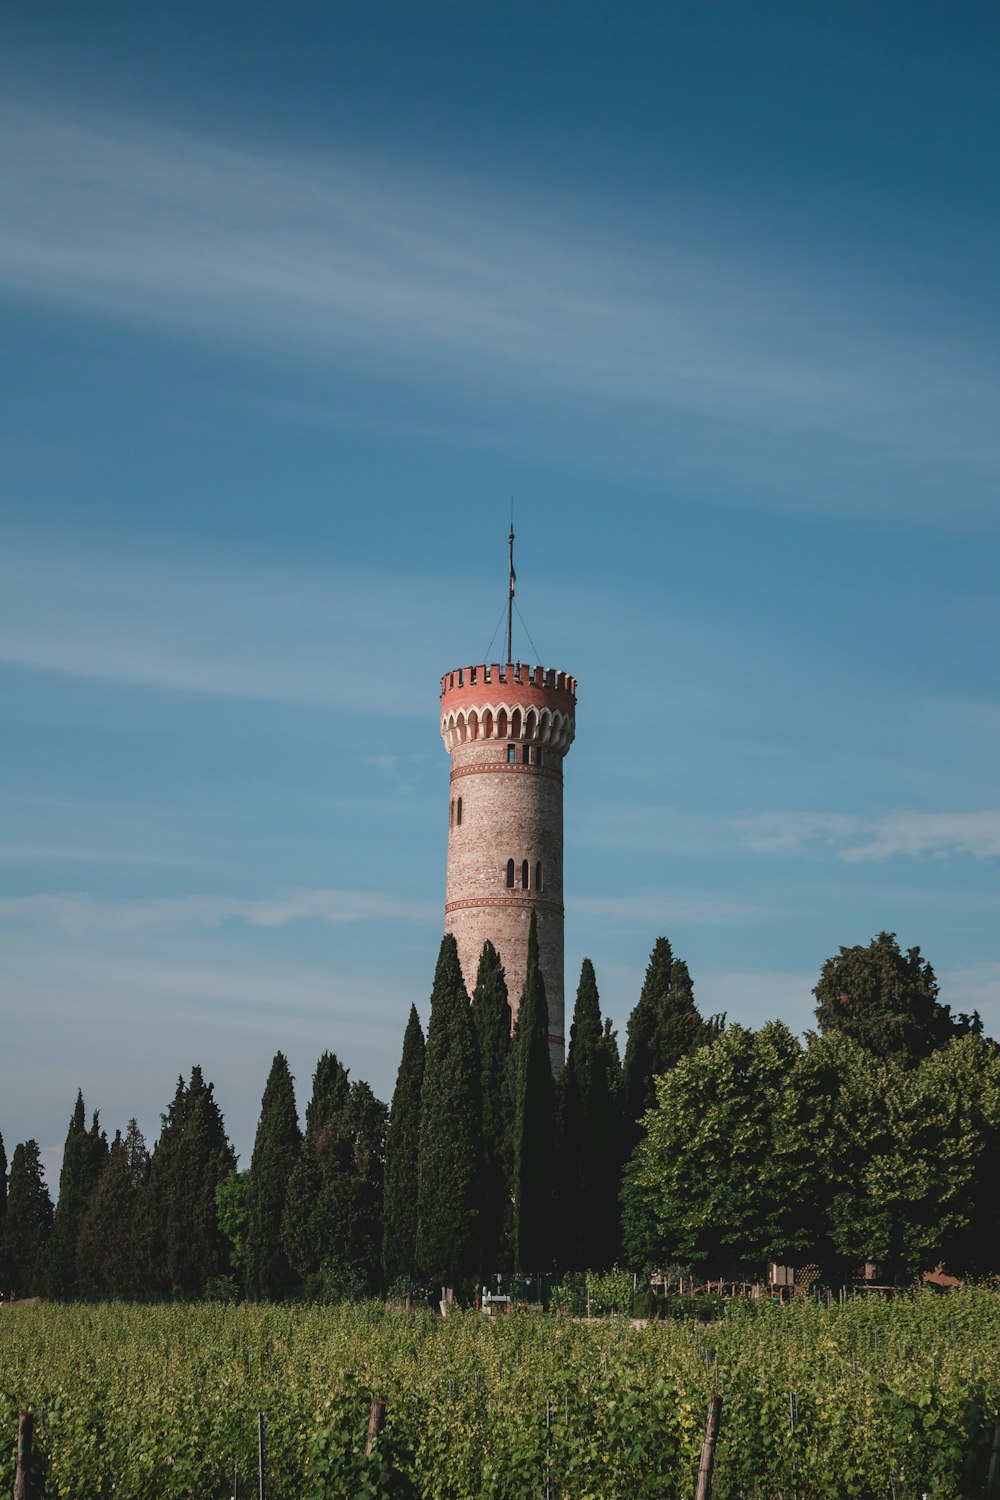 a tall tower sitting in the middle of a lush green field